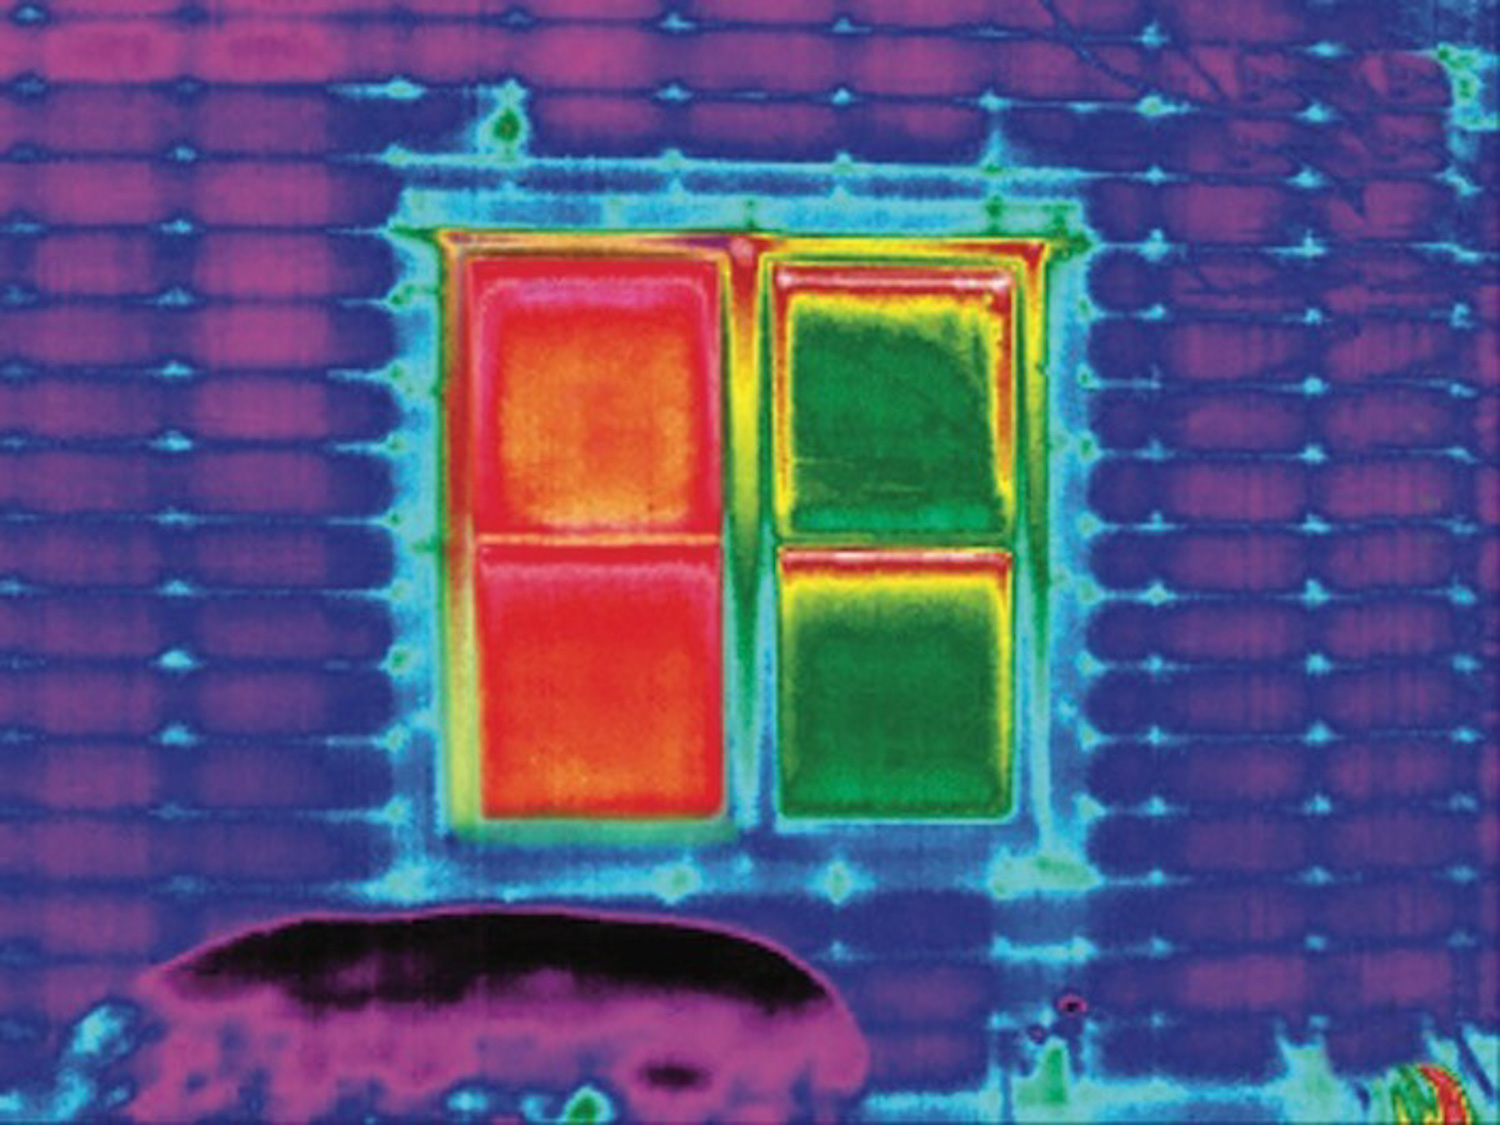 Heat loss comparison: one picture shows a room with shades, the other without. The room with shades has less heat escaping.